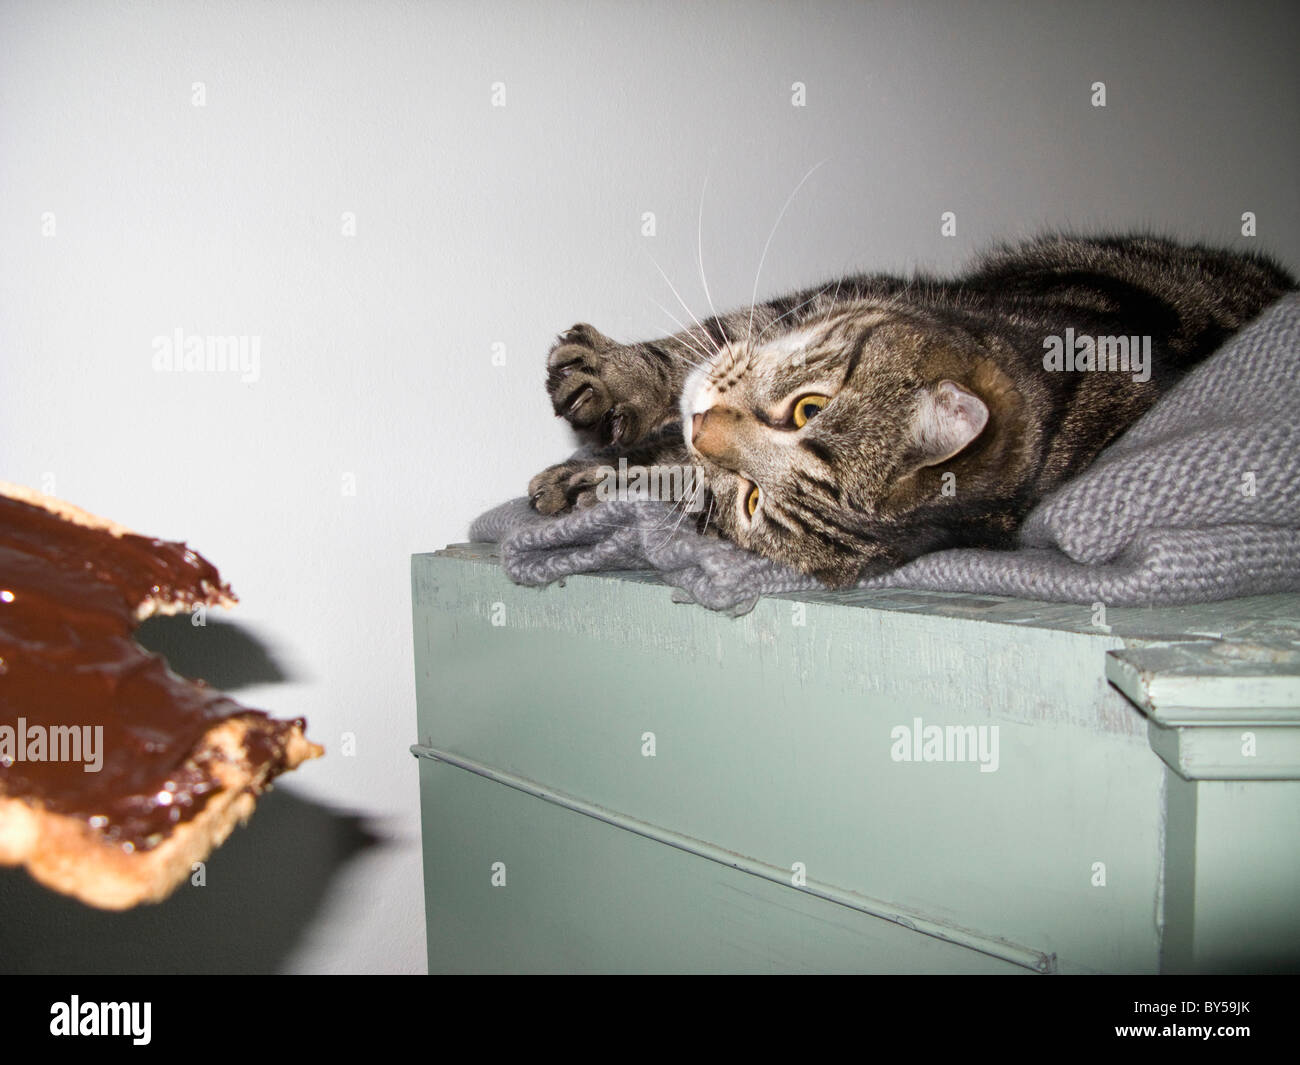 A cat looking at a slice of bread with chocolate spread Stock Photo